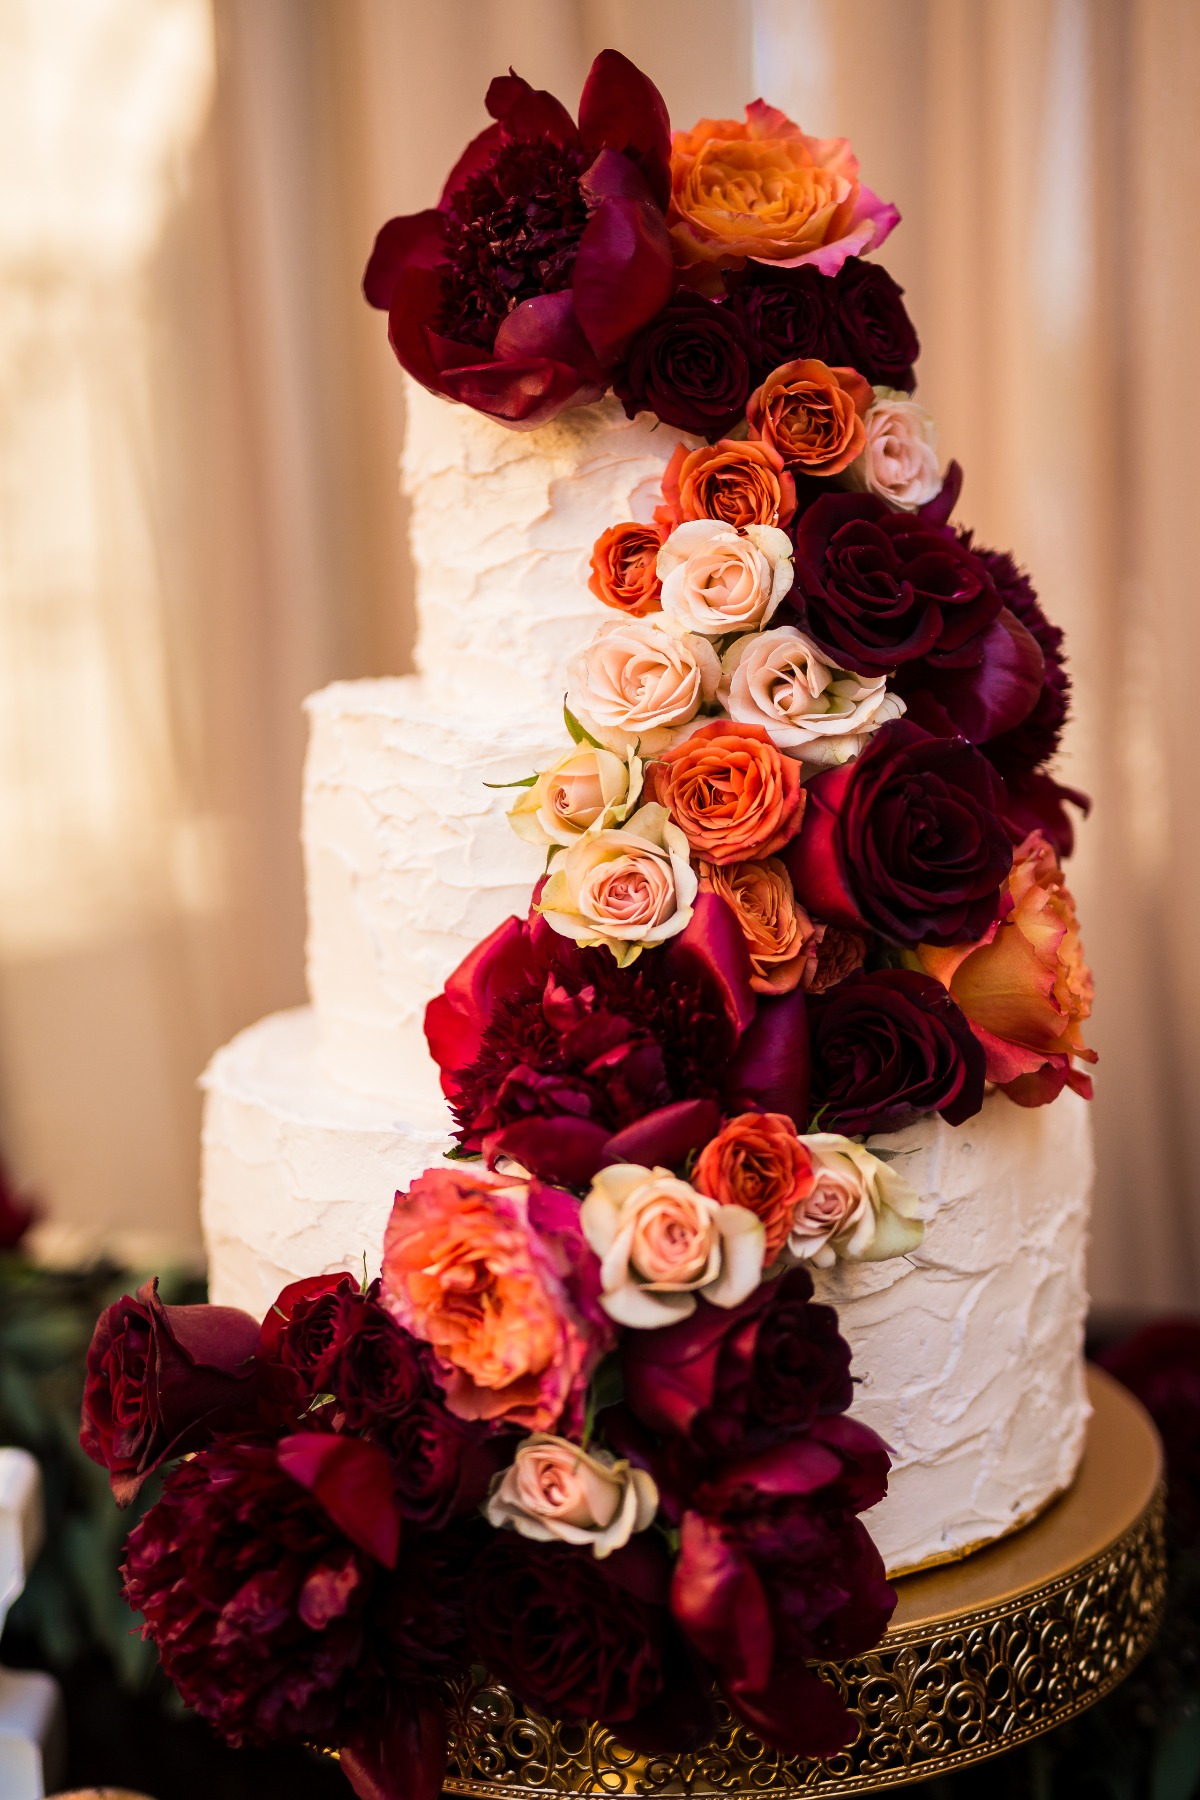 Wedding cake covered in roses